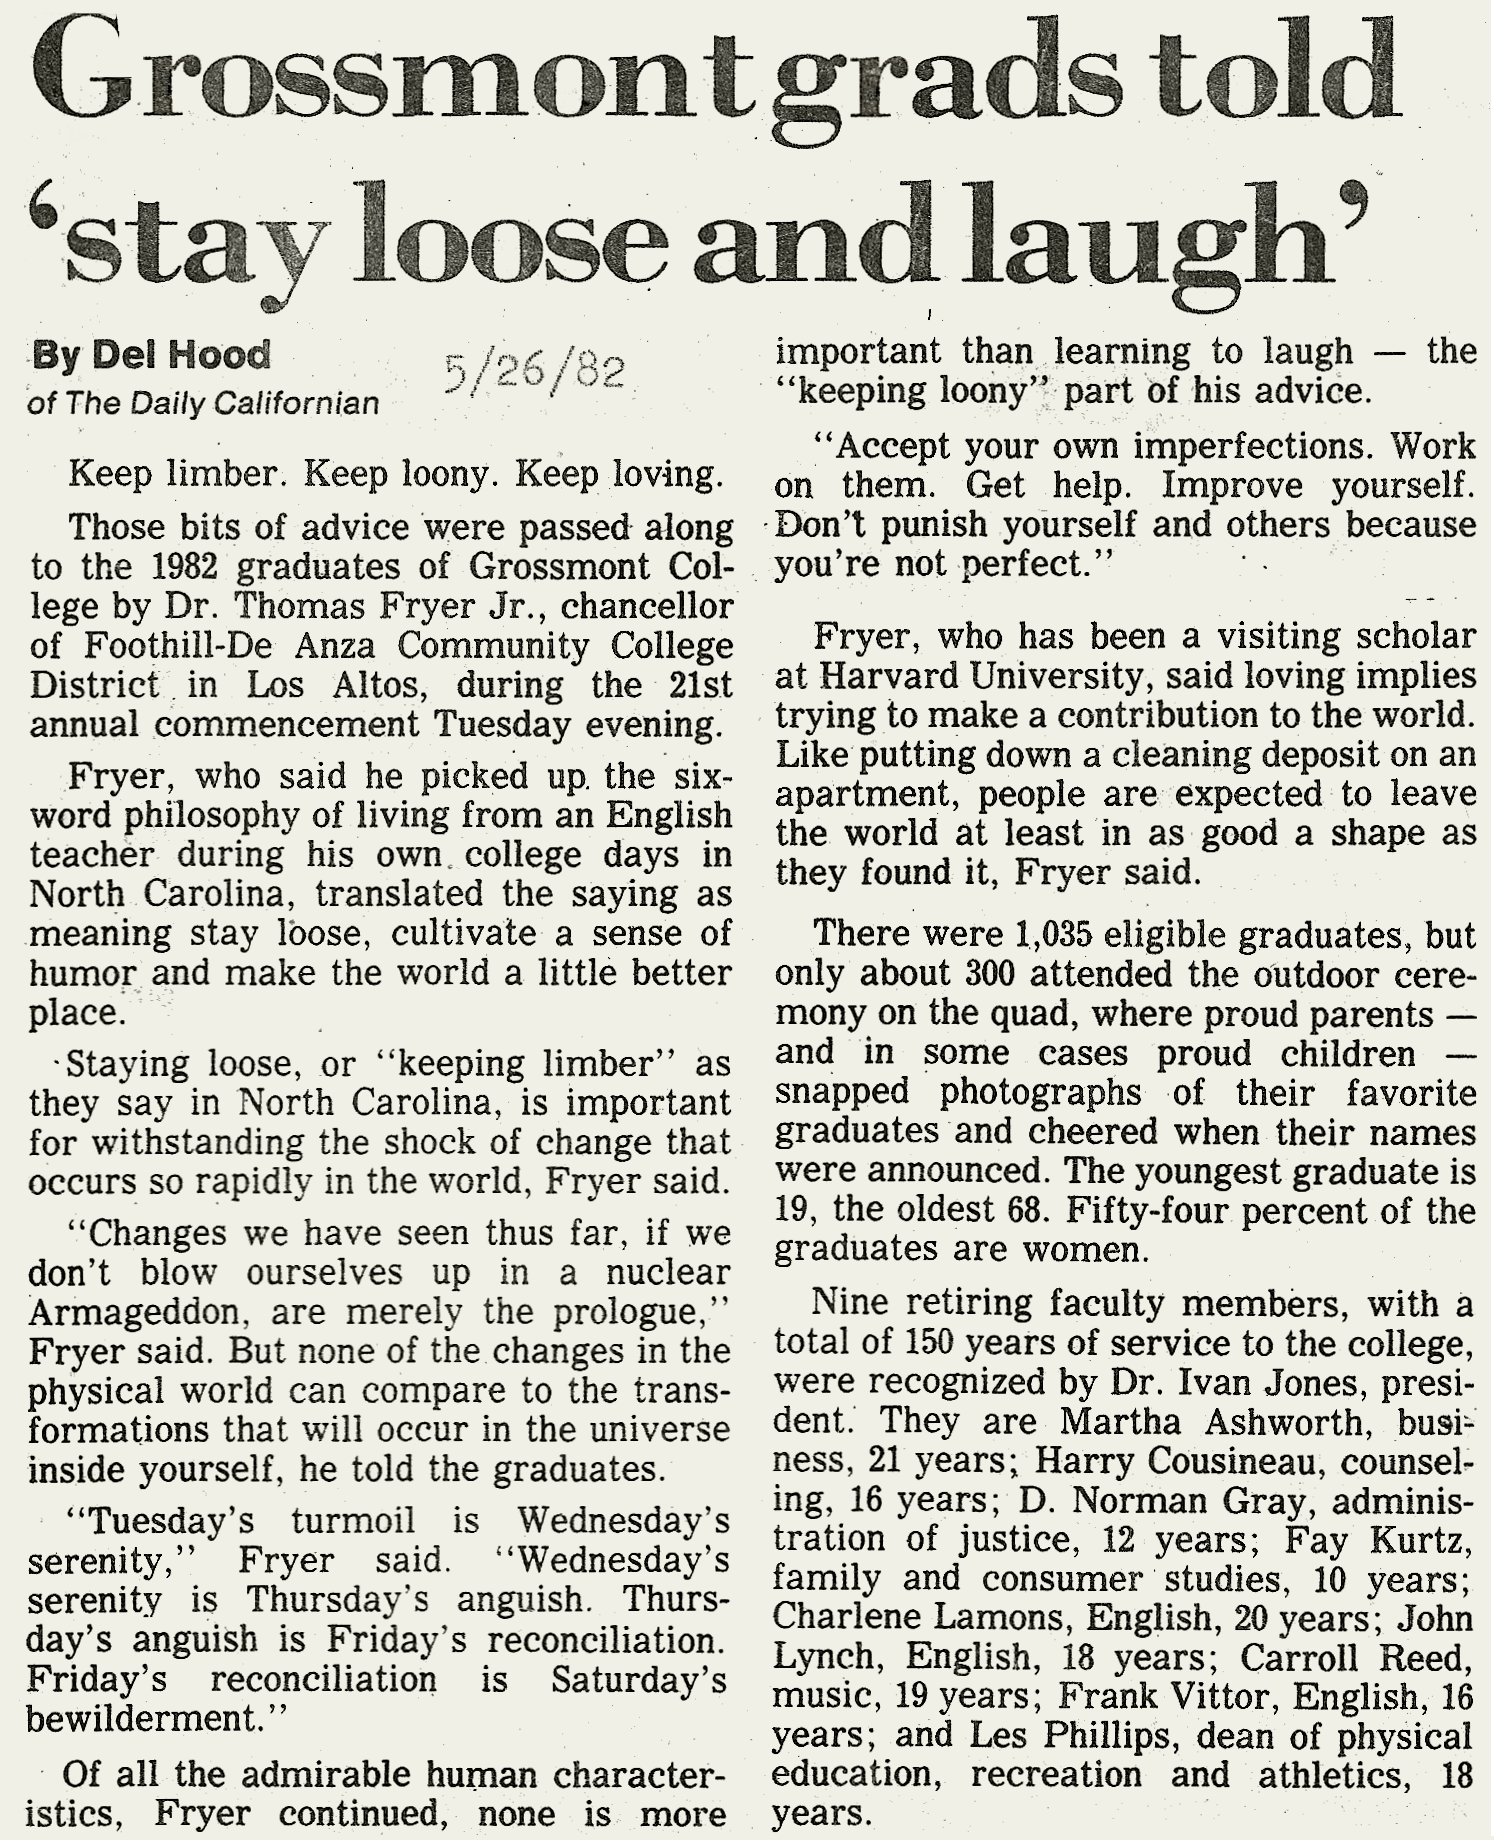  "Grossmont Grads Told 'Stay Loose and Laugh'" Daily Californian May 26 1982